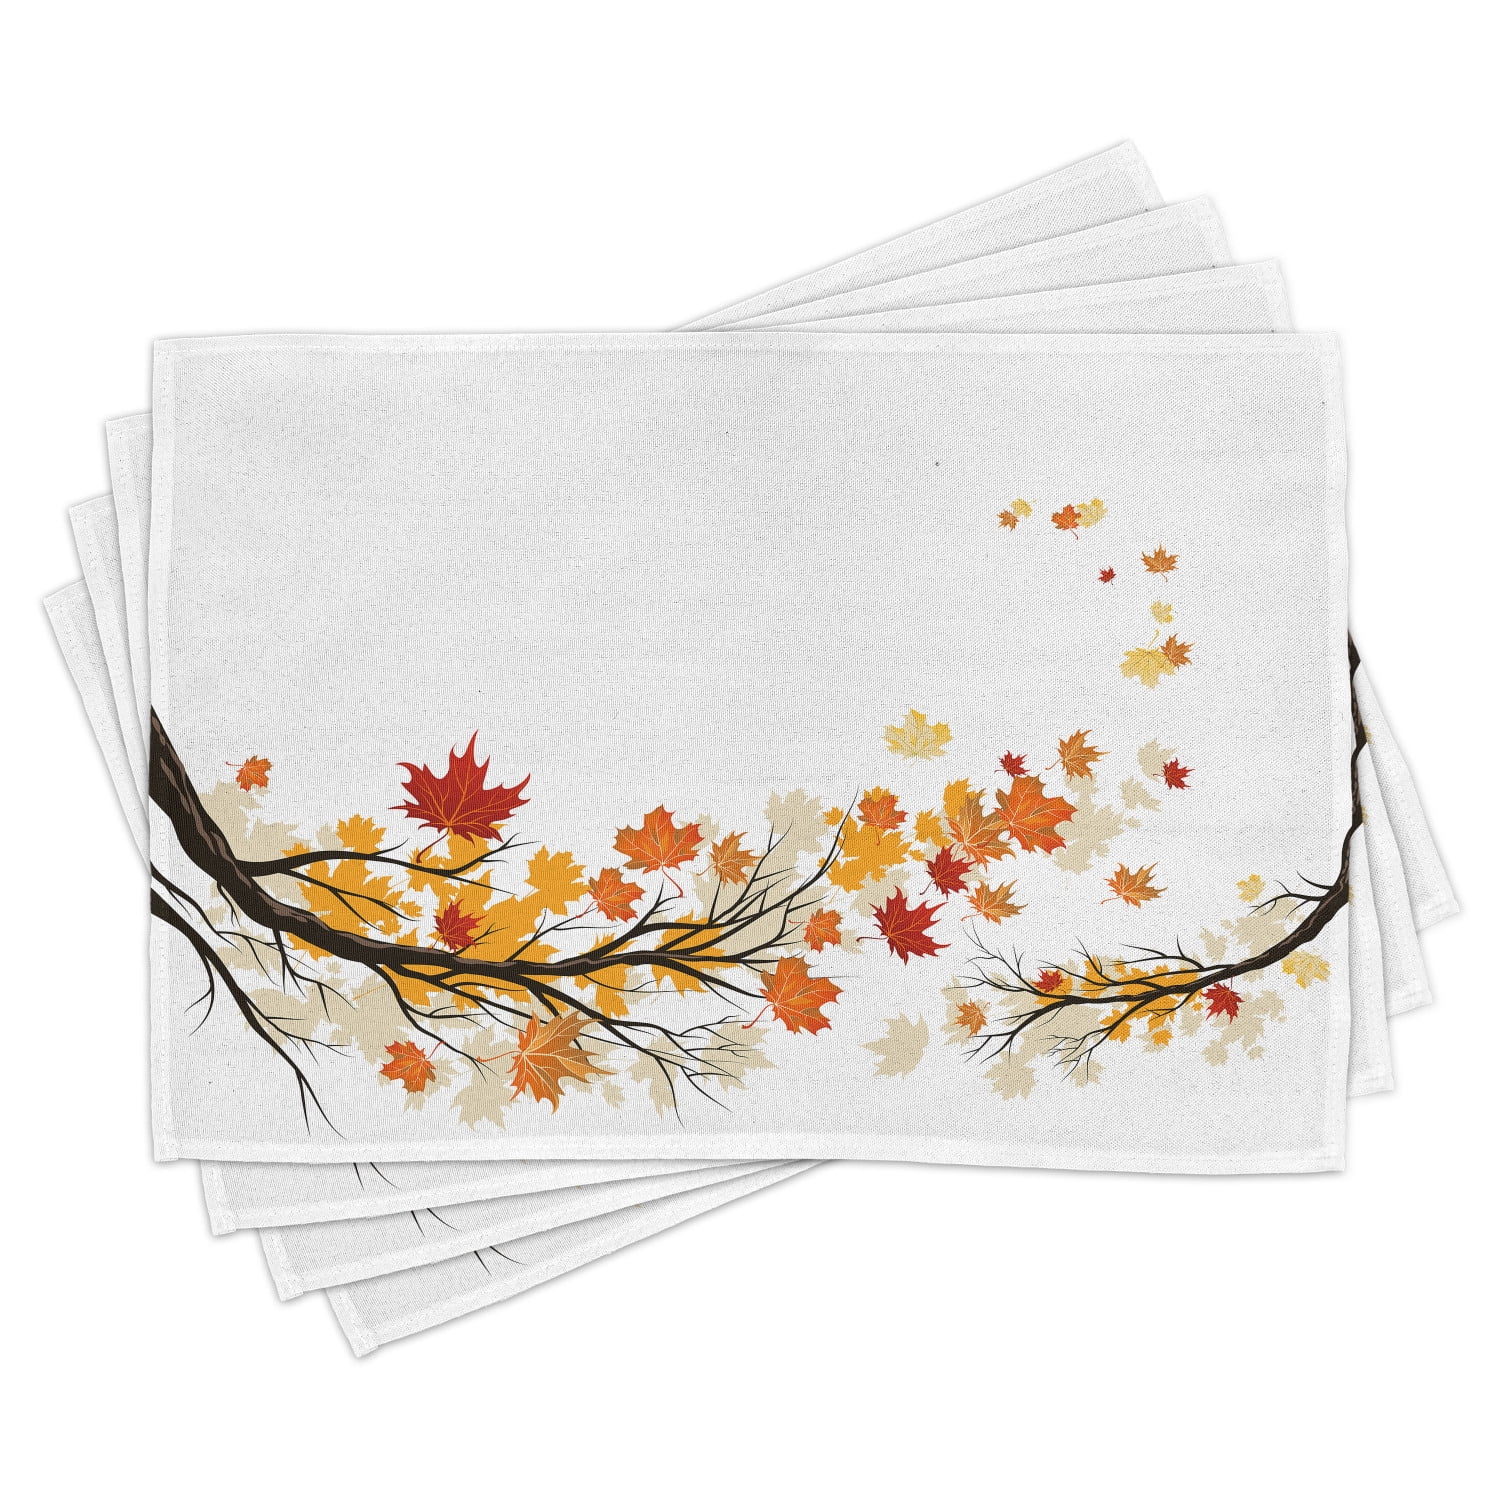 Washable Fabric Placemats for Dining Table Forest Flowers Leaves Petals Woodland Inspired Bloom Season Gardening Standard Size Marigold and Orange Ambesonne Botanic Place Mats Set of 4